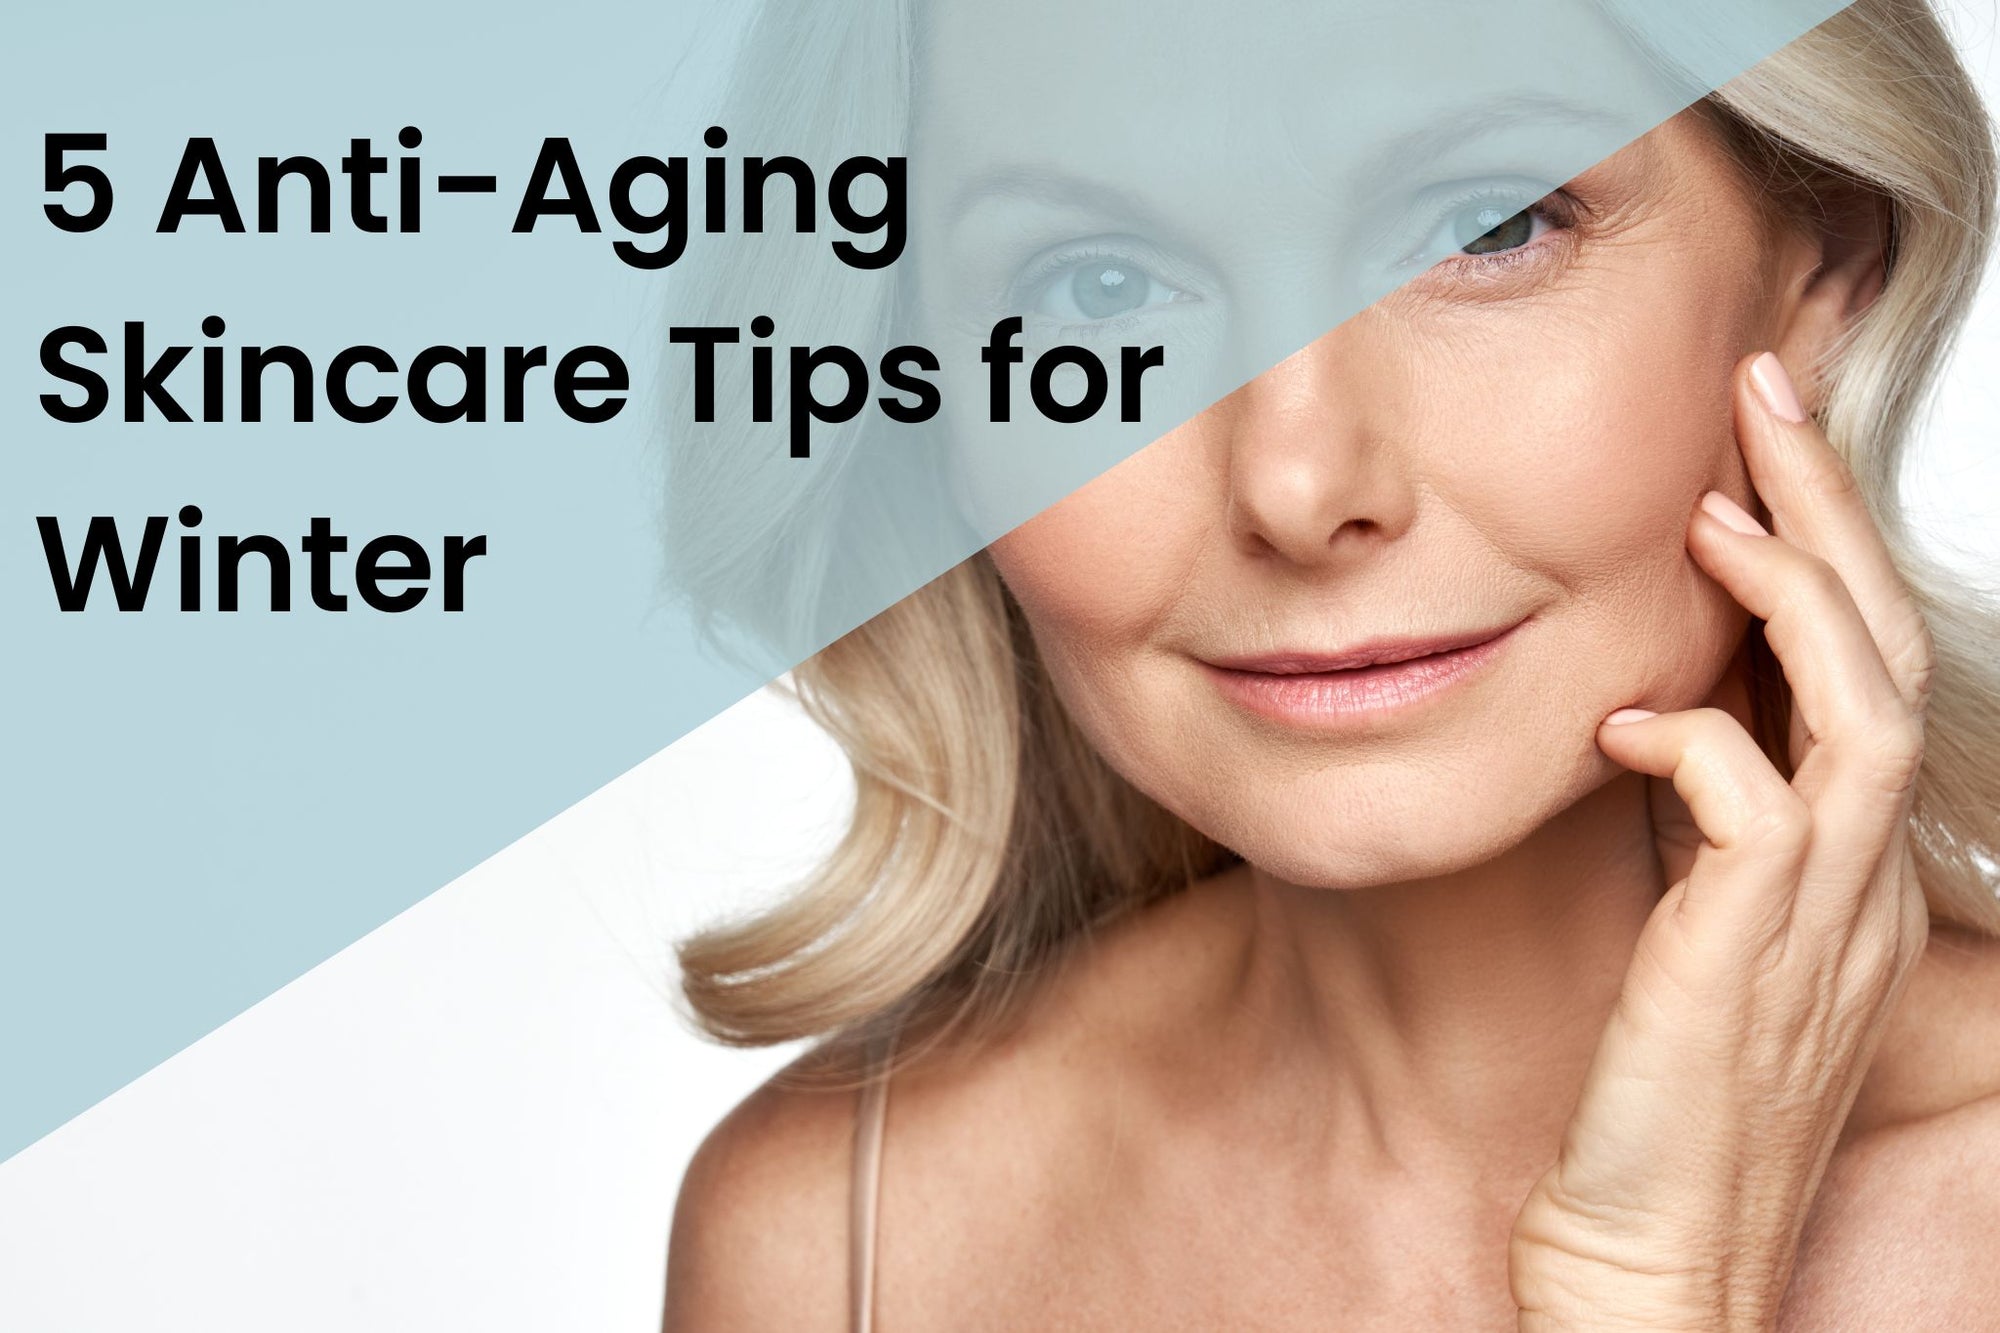 5 Anti-Aging Skincare Tips For Winter